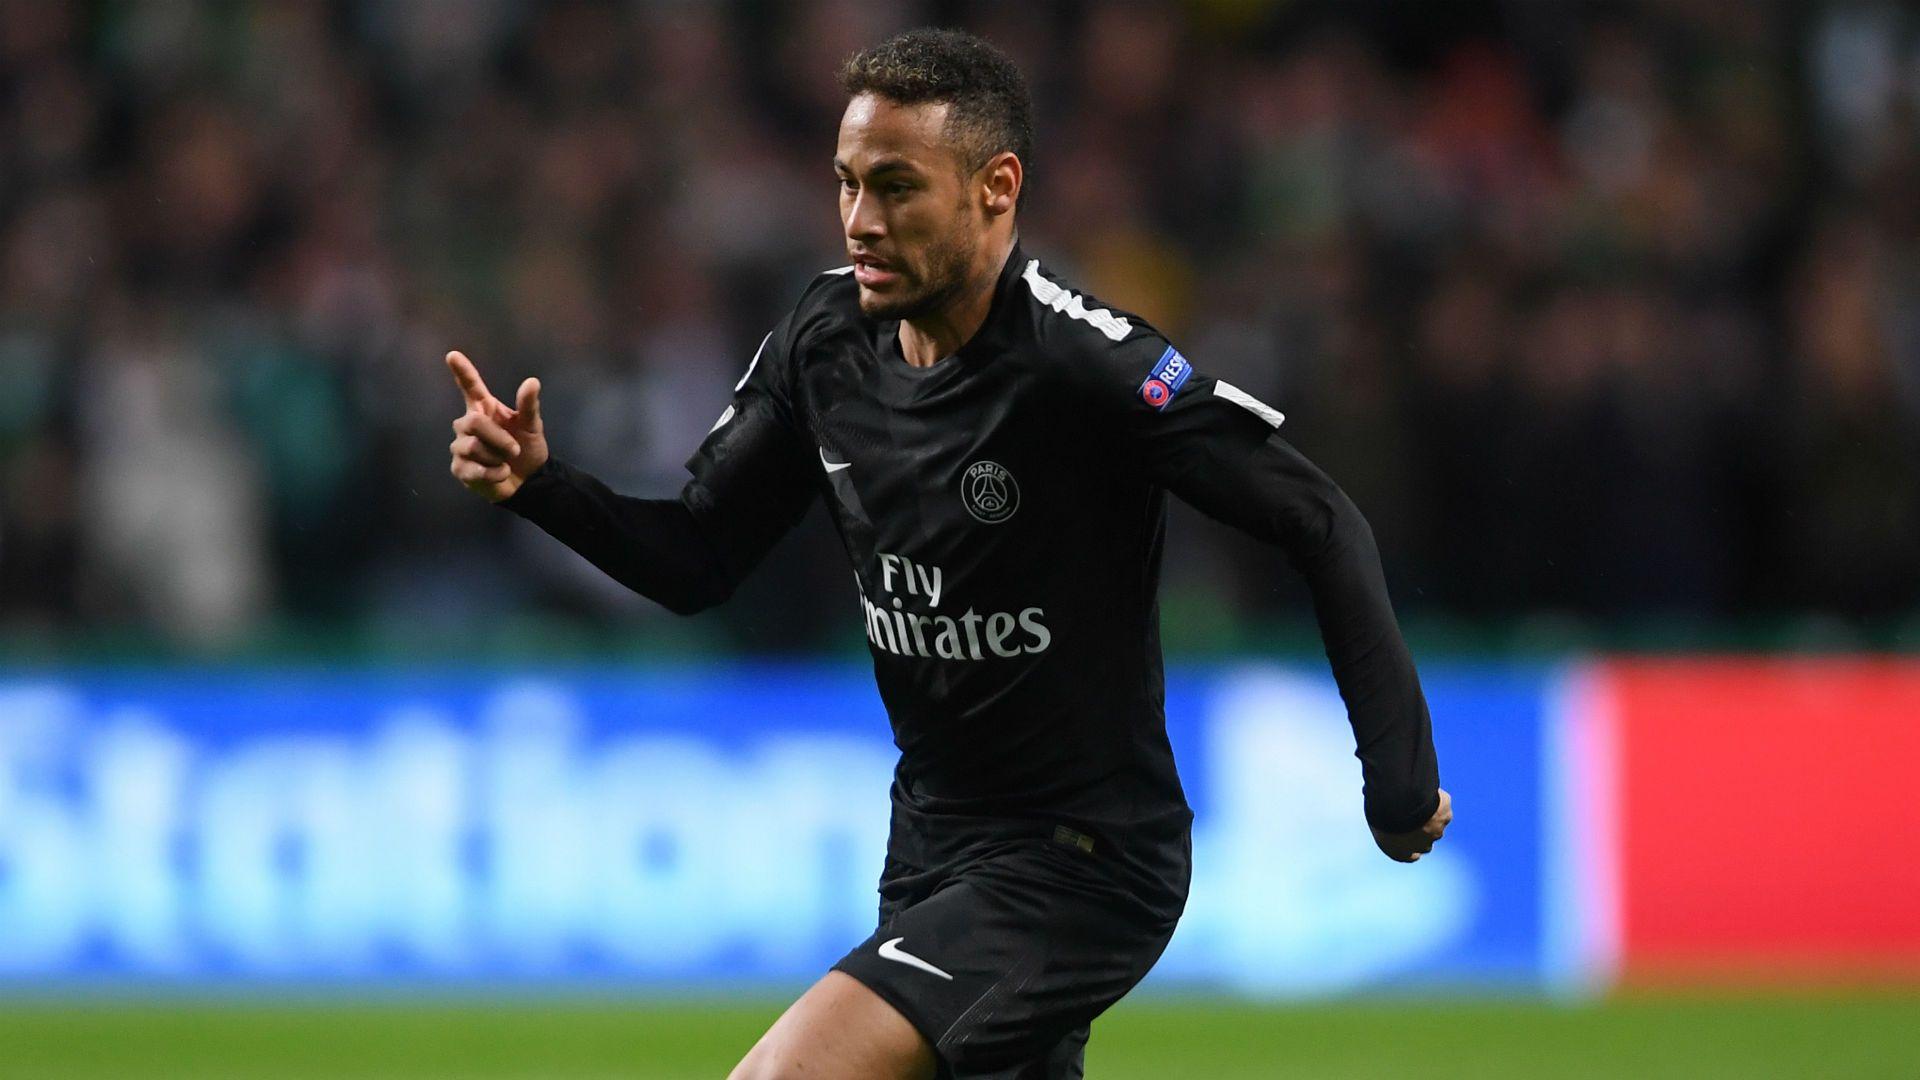 Neymar set to return for PSG in Champions League clash against